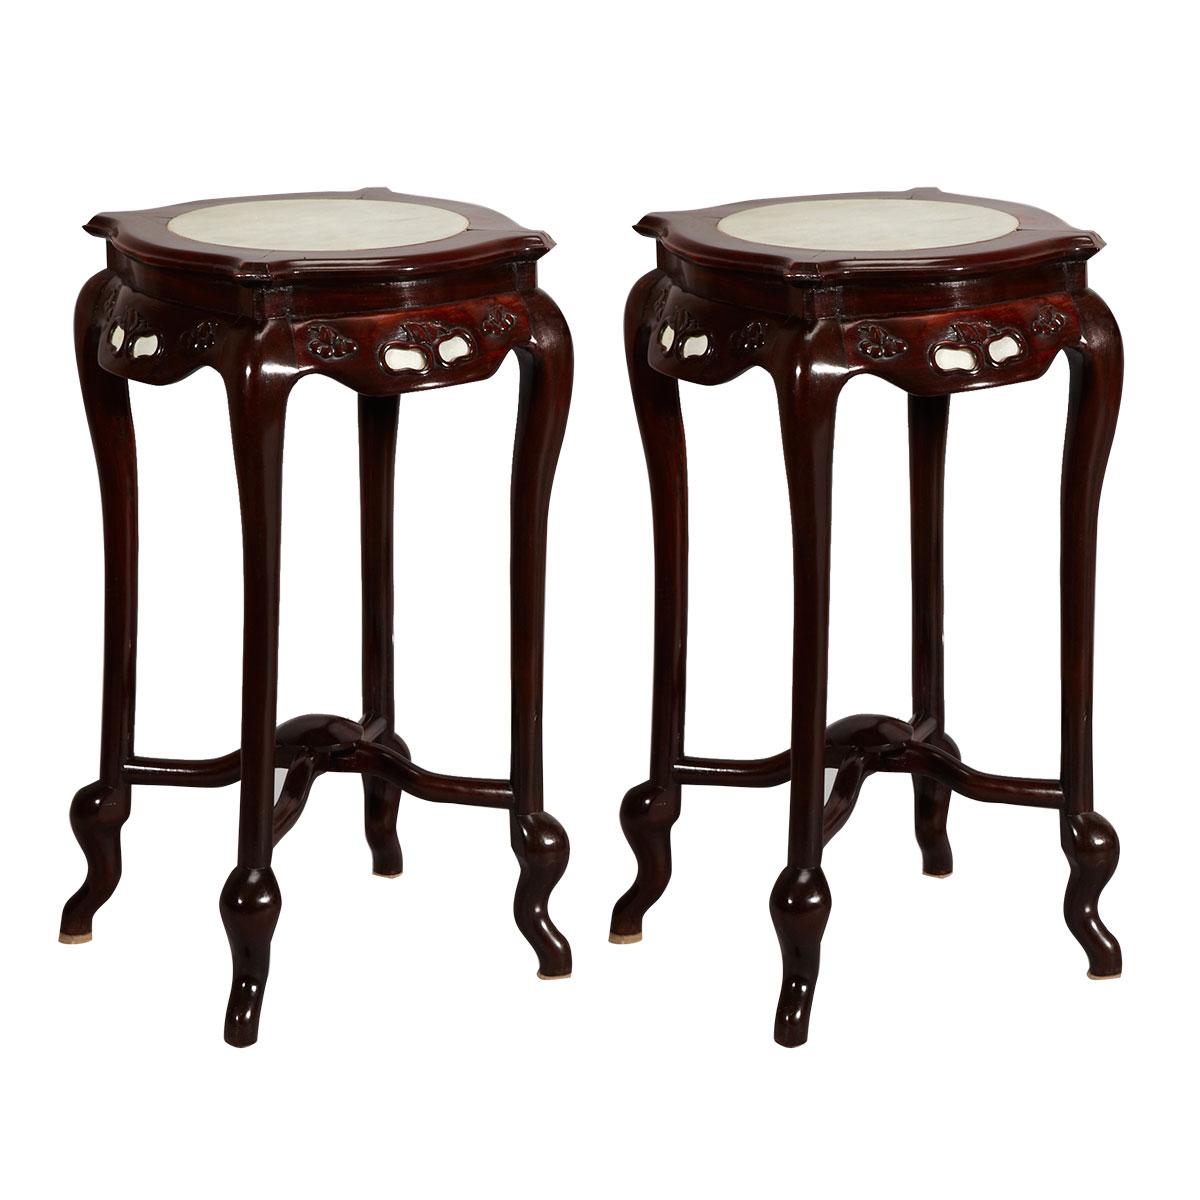 Pair of Hardwood Stands with Marble Inlay